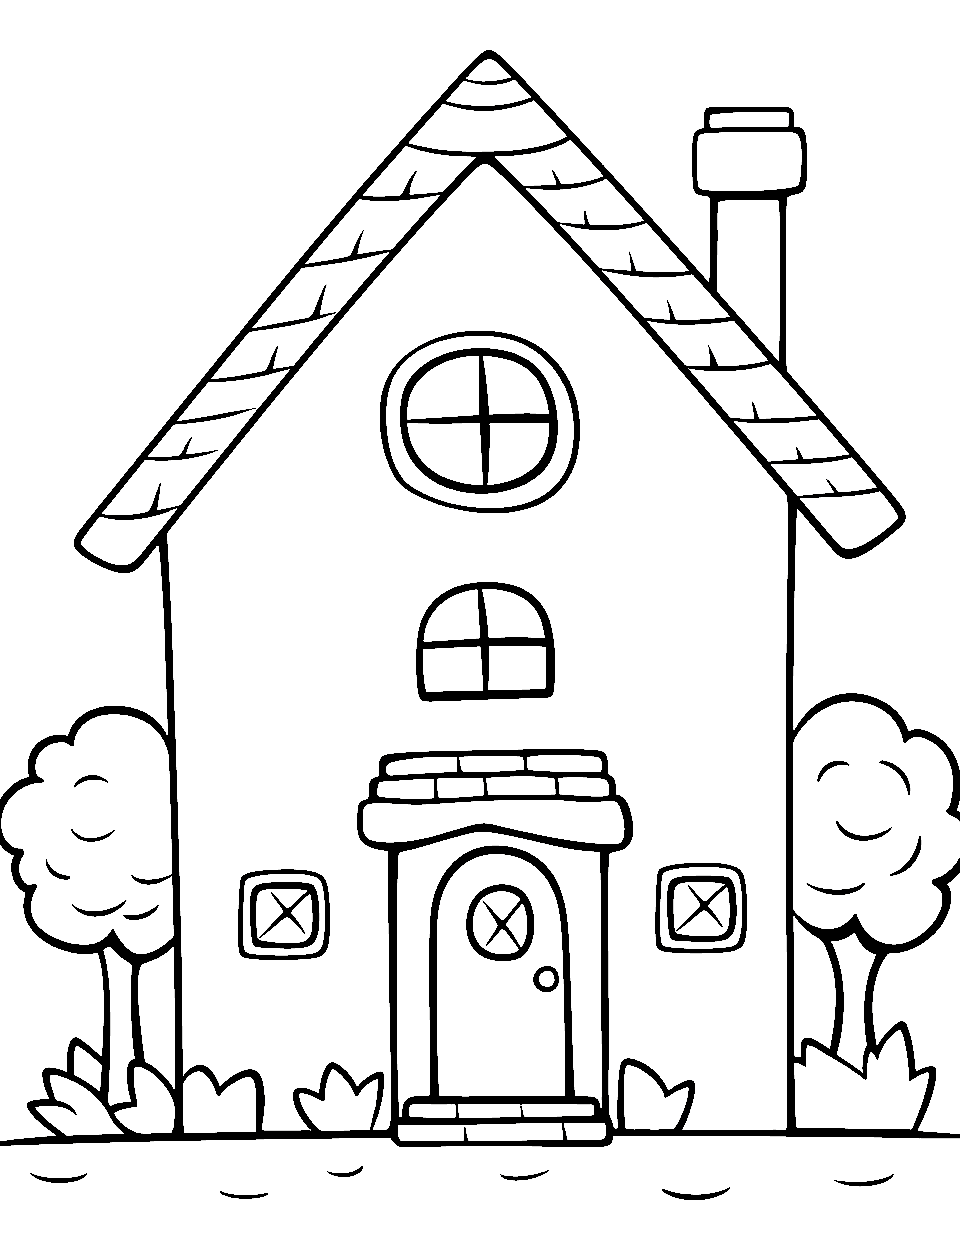 House of Happiness Coloring Page - A simple house with a front yard.